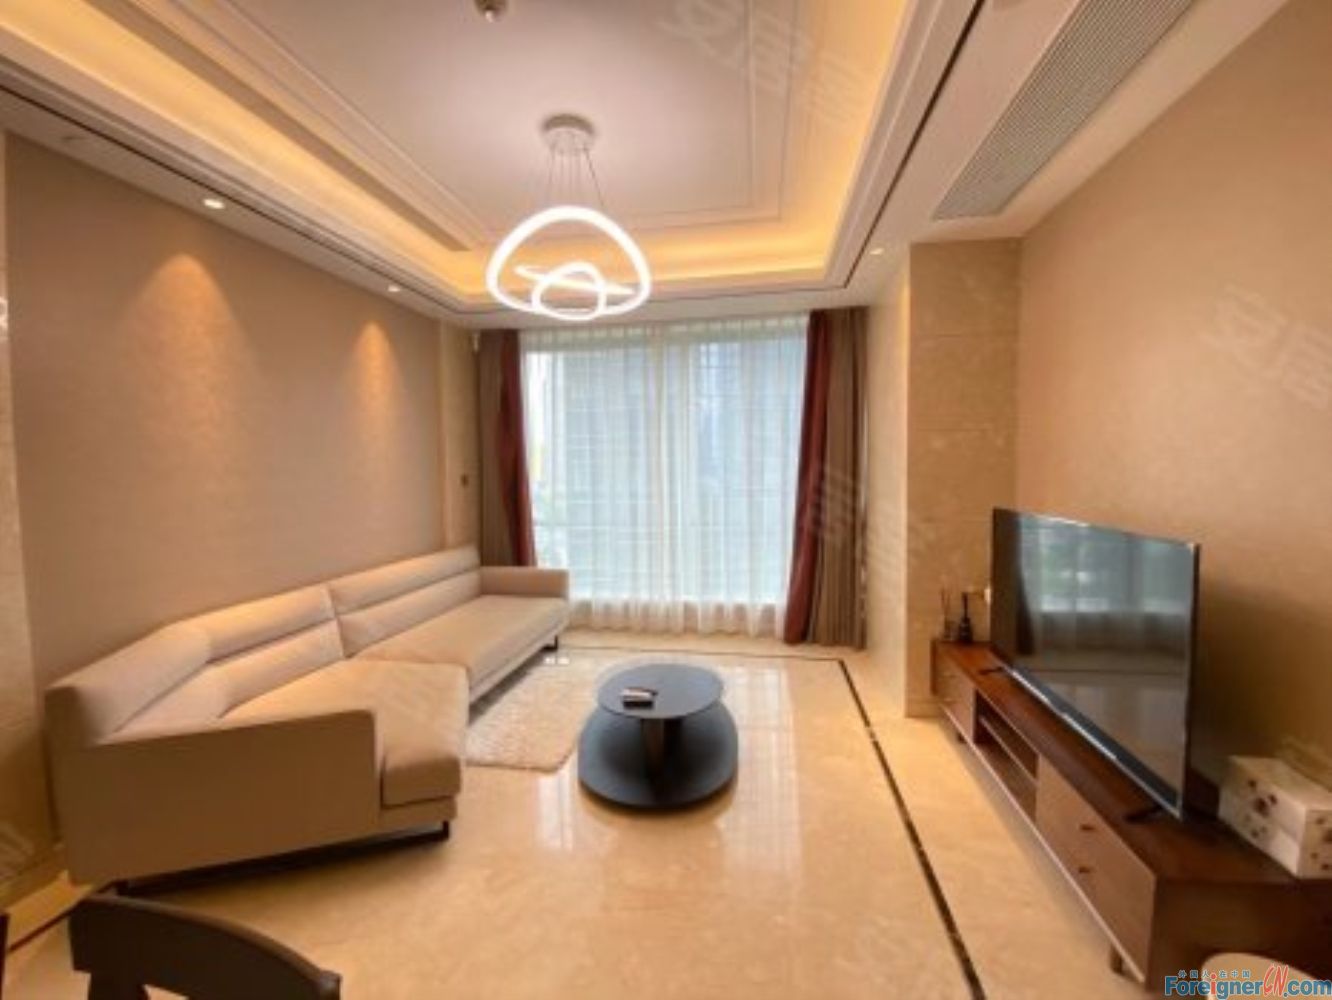 Gorgeous!!!Suzhou Center No. 8 apartment for expats to rent /1 bedroom and 1 bathroom/central AC/close to Suzhou Center shopping mall /Xinghai square/ Xinghu Park /SIP